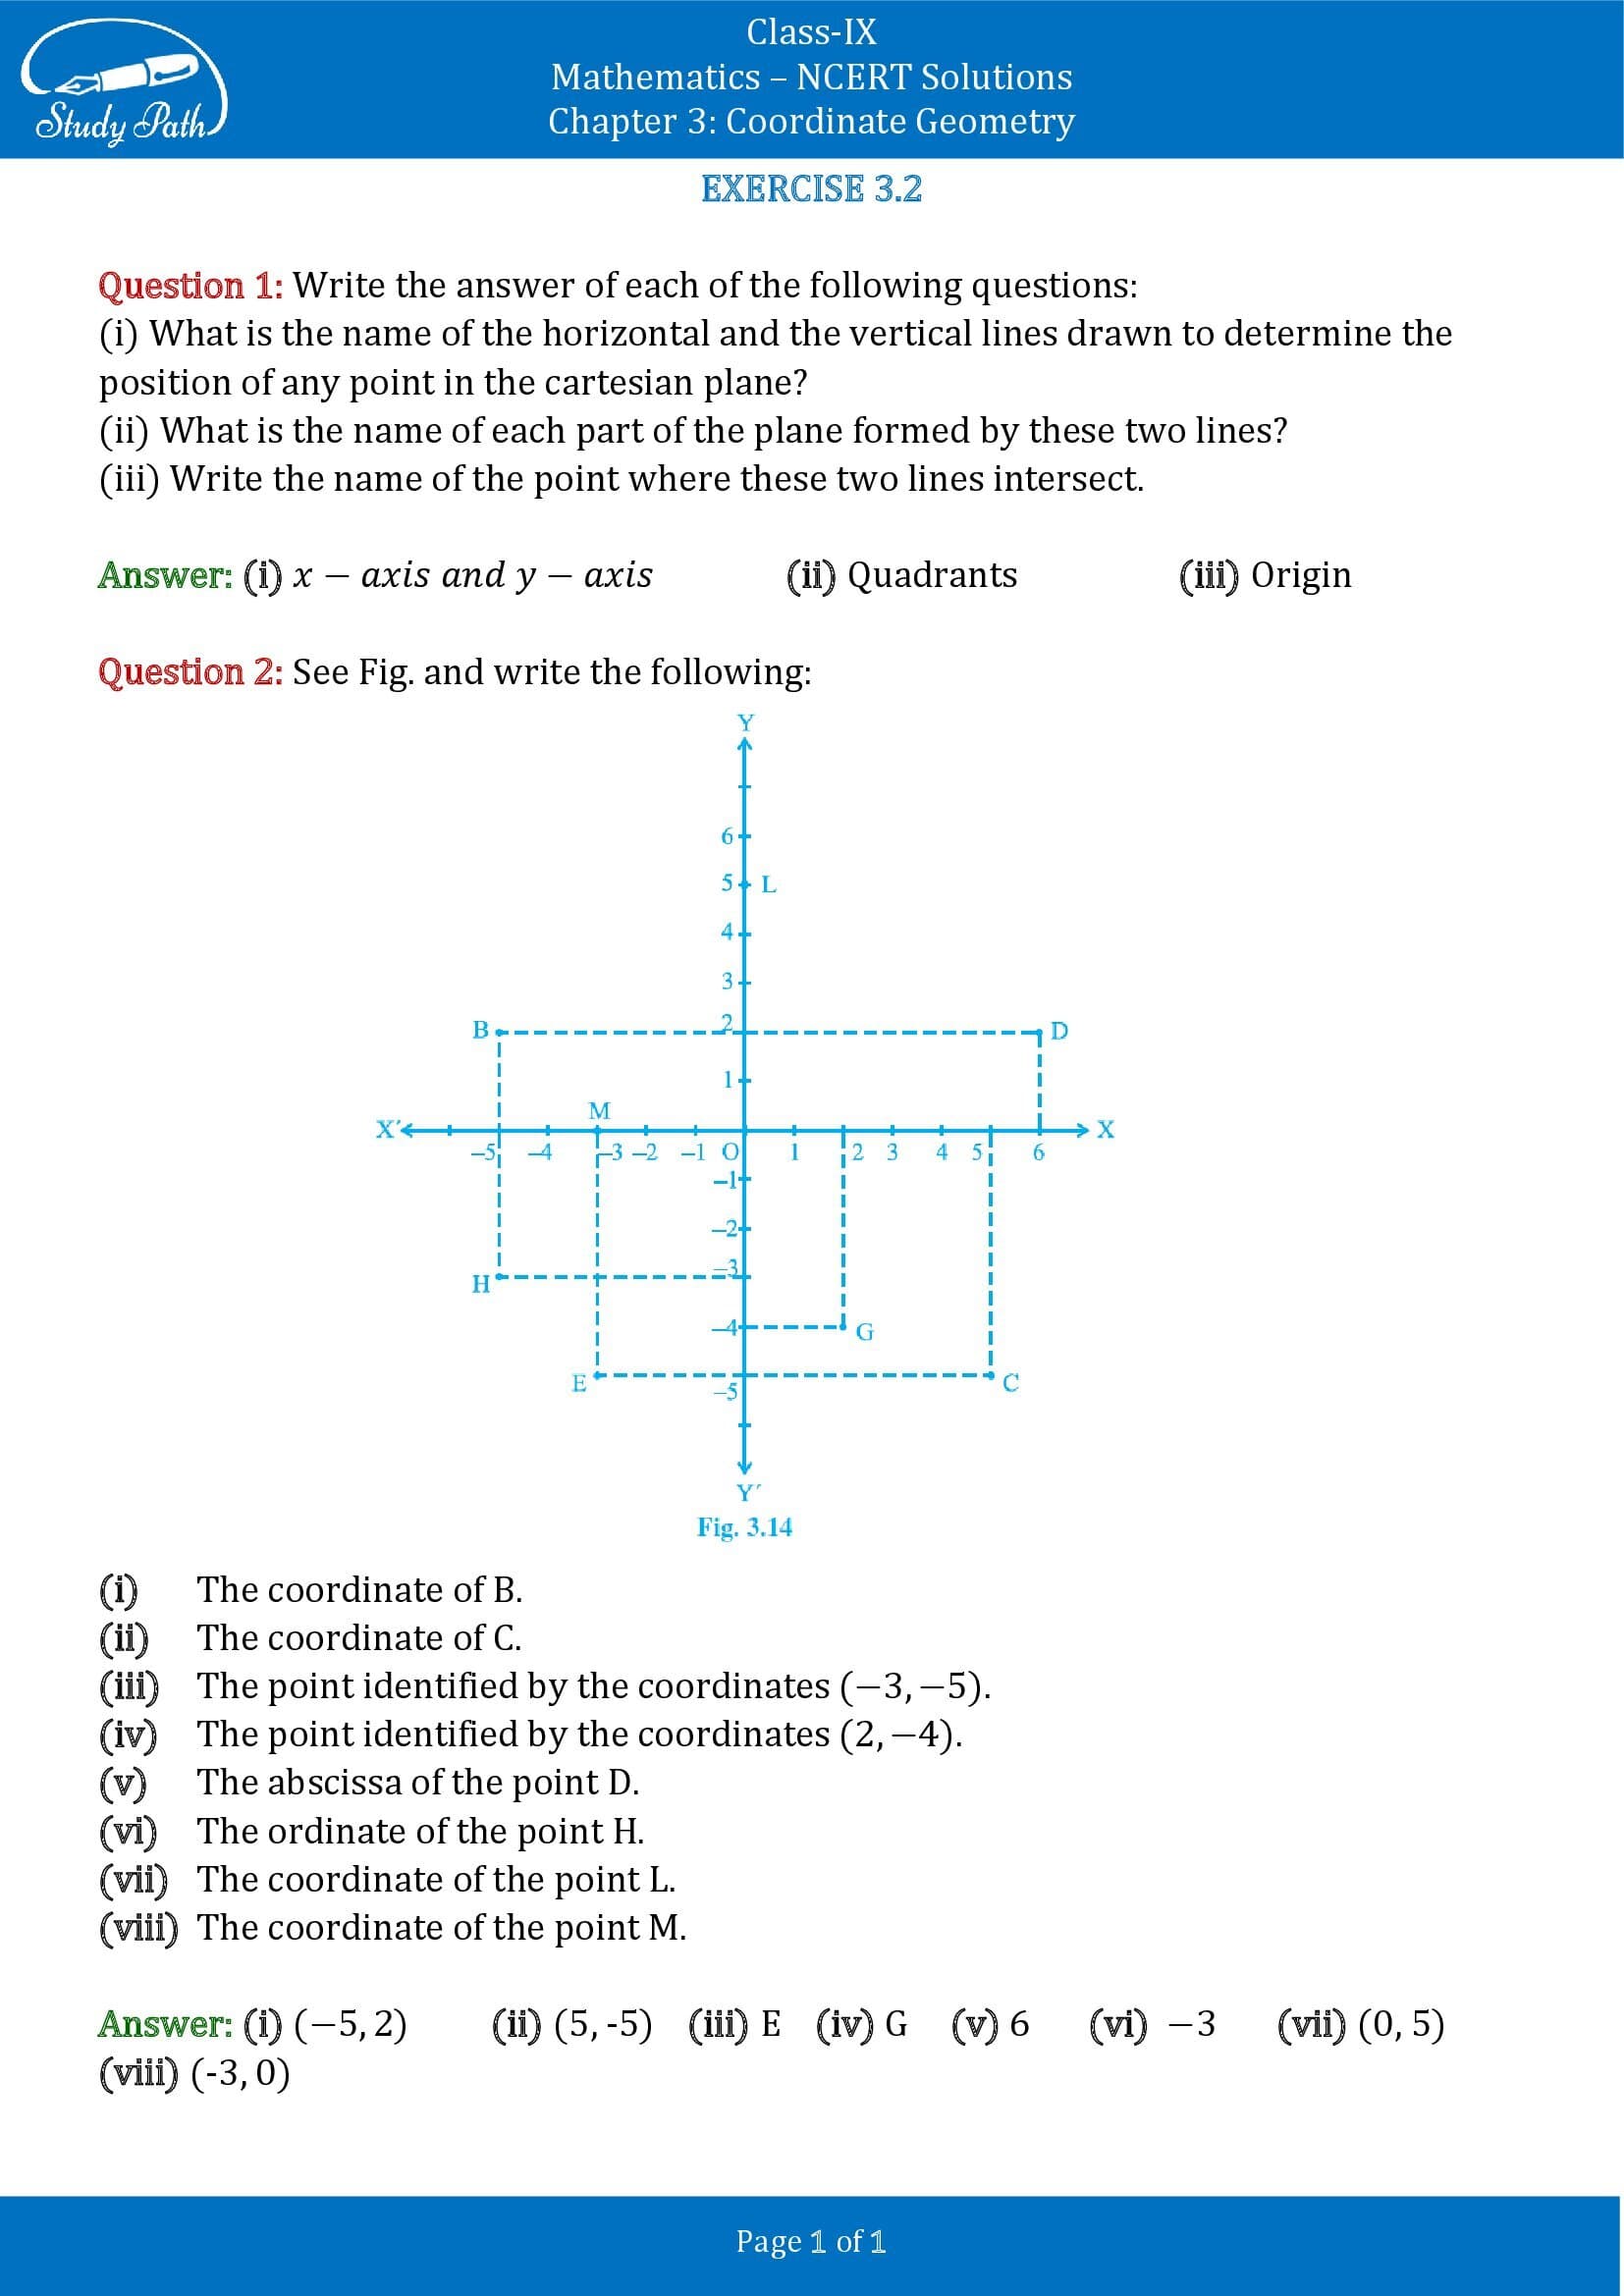 NCERT Solutions for Class 9 Maths Chapter 3 Corrdinate Geometry Exercise 3.2